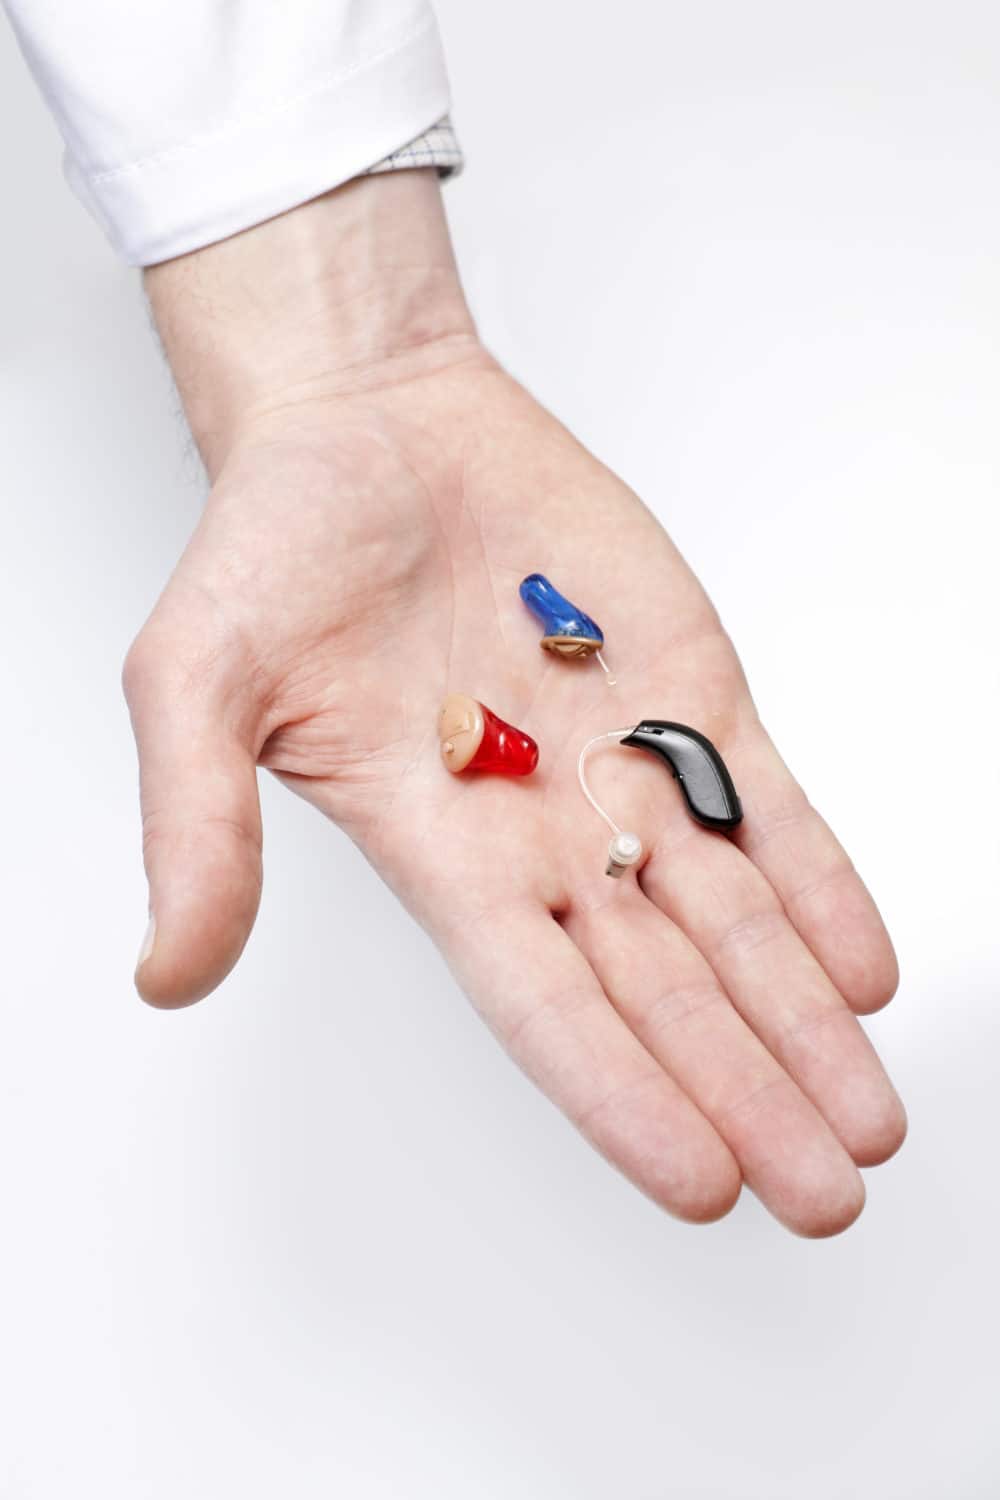 hearing aids in hand